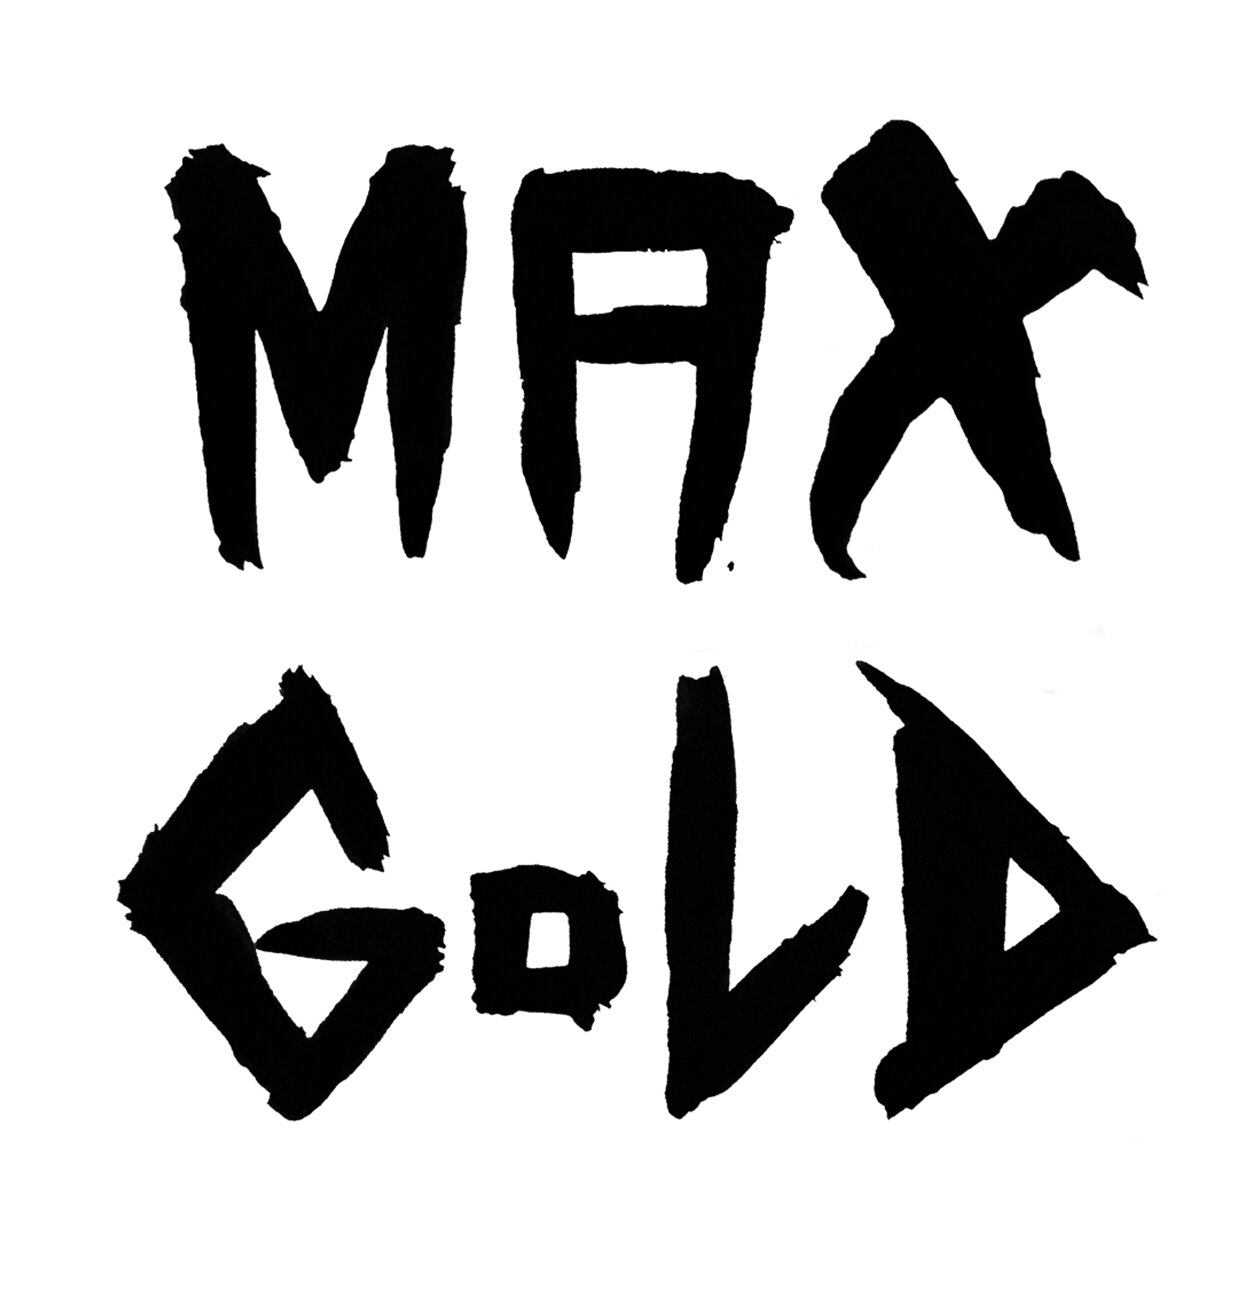  Max Gold is an upcoming EDM producer. He contacted me to design several elements of his brand. The theme was straightforward enough; he wanted me to reproduce my geometric/nebula design that I've done in the past. I found it interesting to see how m